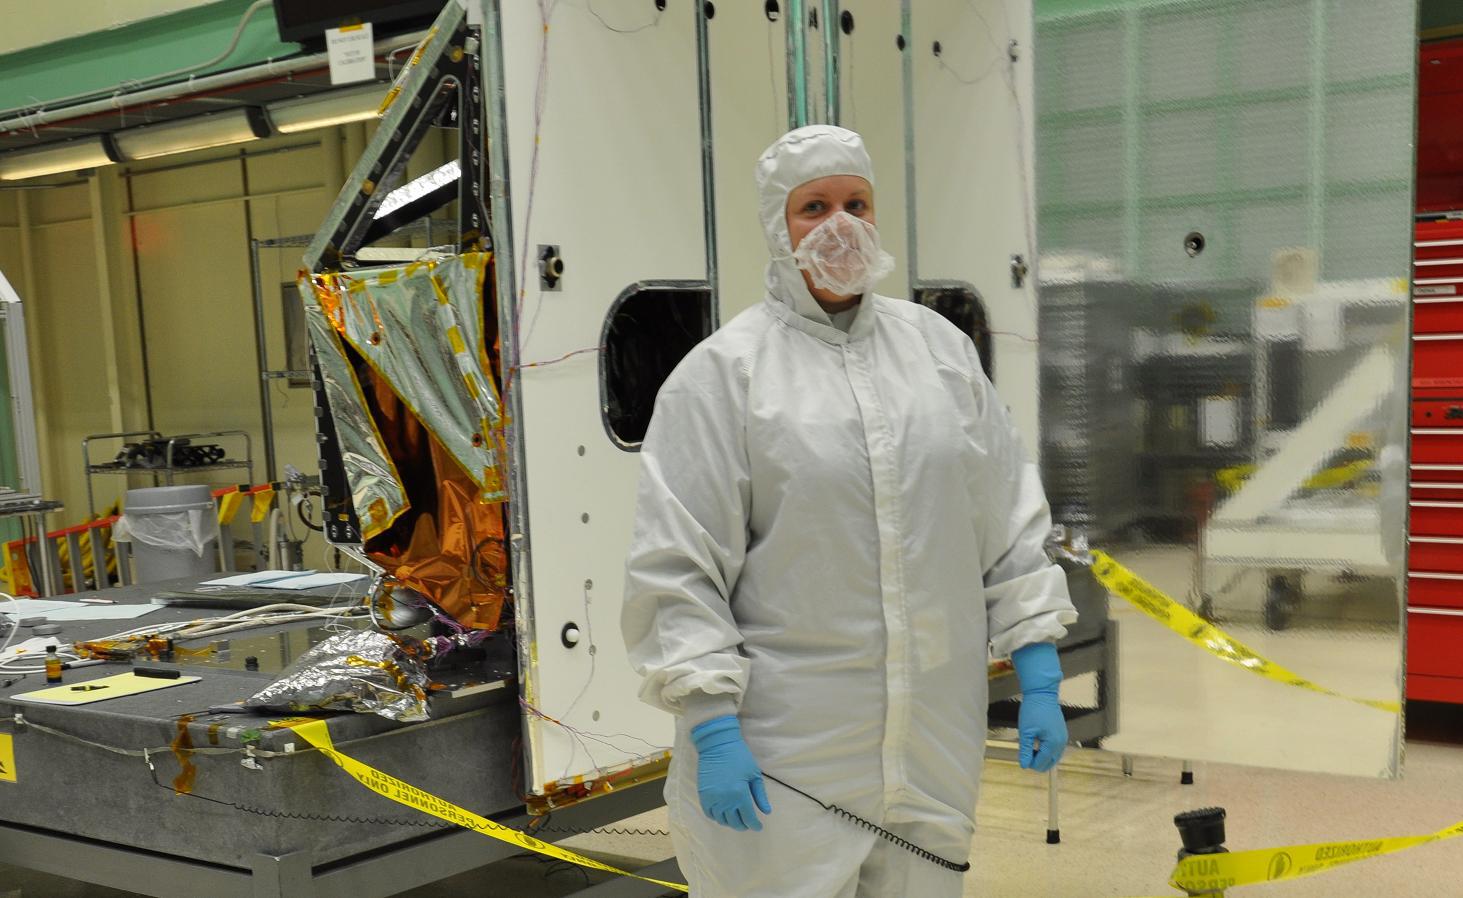 A woman wearing a white coverall suit, lightweight white mask, and blue gloves stands in a cleanroom in front of NASA/USGS' TIRS-1 instrument, a thermal sensor that measures land surface temperature. To her left, orange and silver protective sheeting hangs on a frame above a dark gray desk with a yellow clipboard and other papers sitting on top. A trash can and ladder are visible behind the desk. To the woman's right, a reflective panel mirrors the green and white walls of the cleanroom and other boxes and cabinets. On either side of her are strips of yellow caution tape.